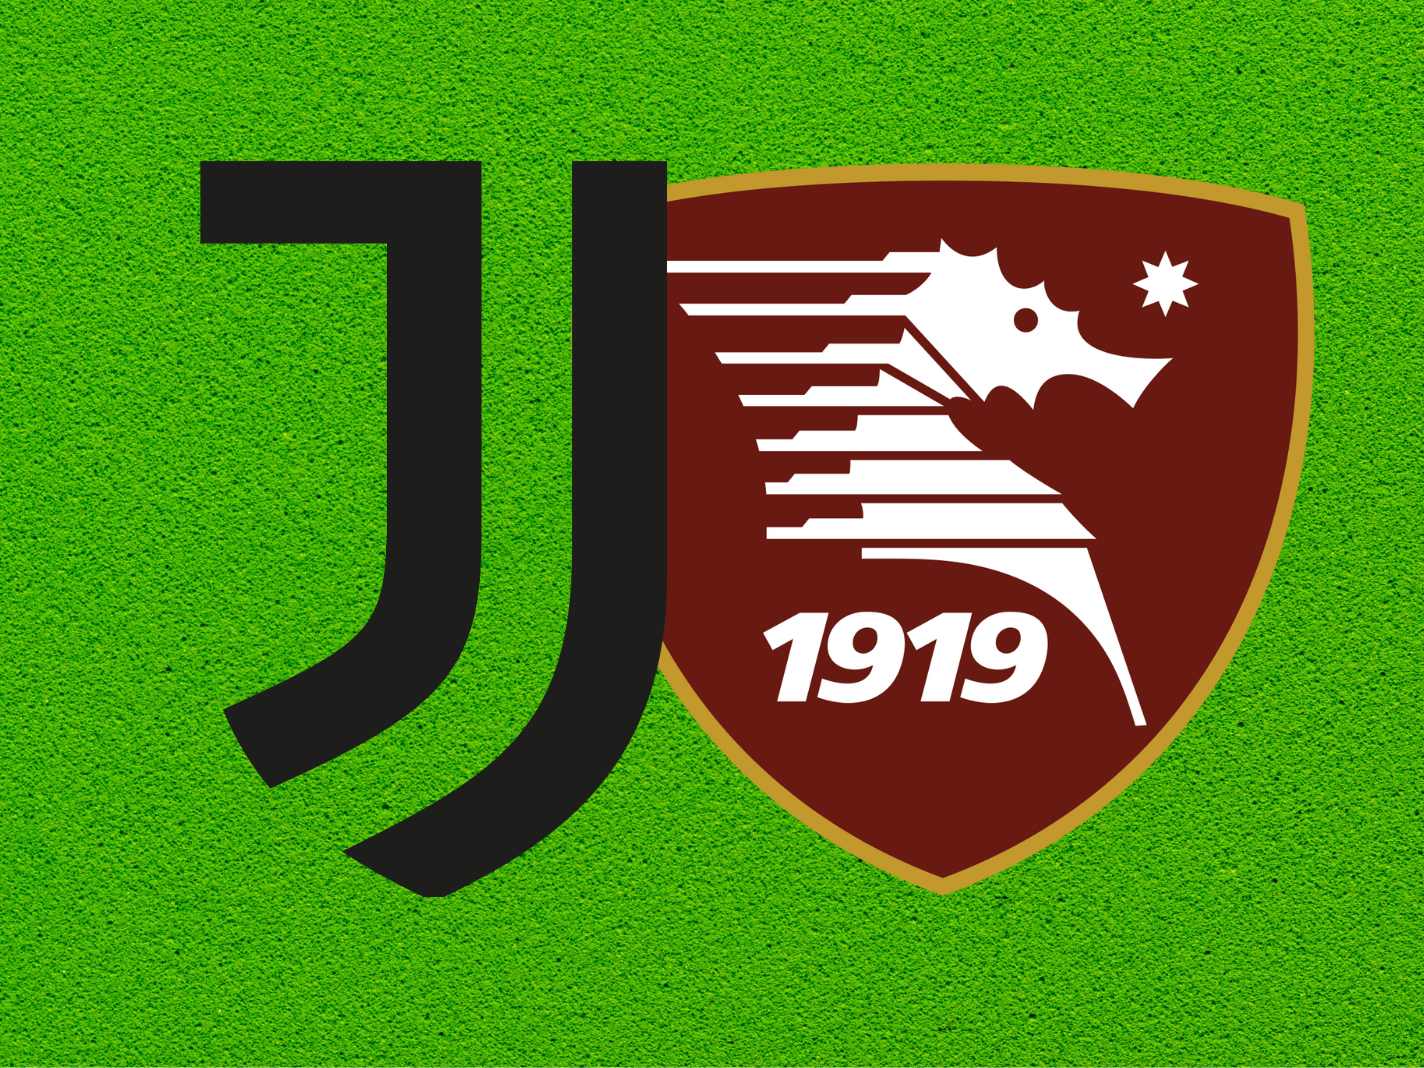 Latest Betting Odds And Predictions For Juventus Vs Salernitana